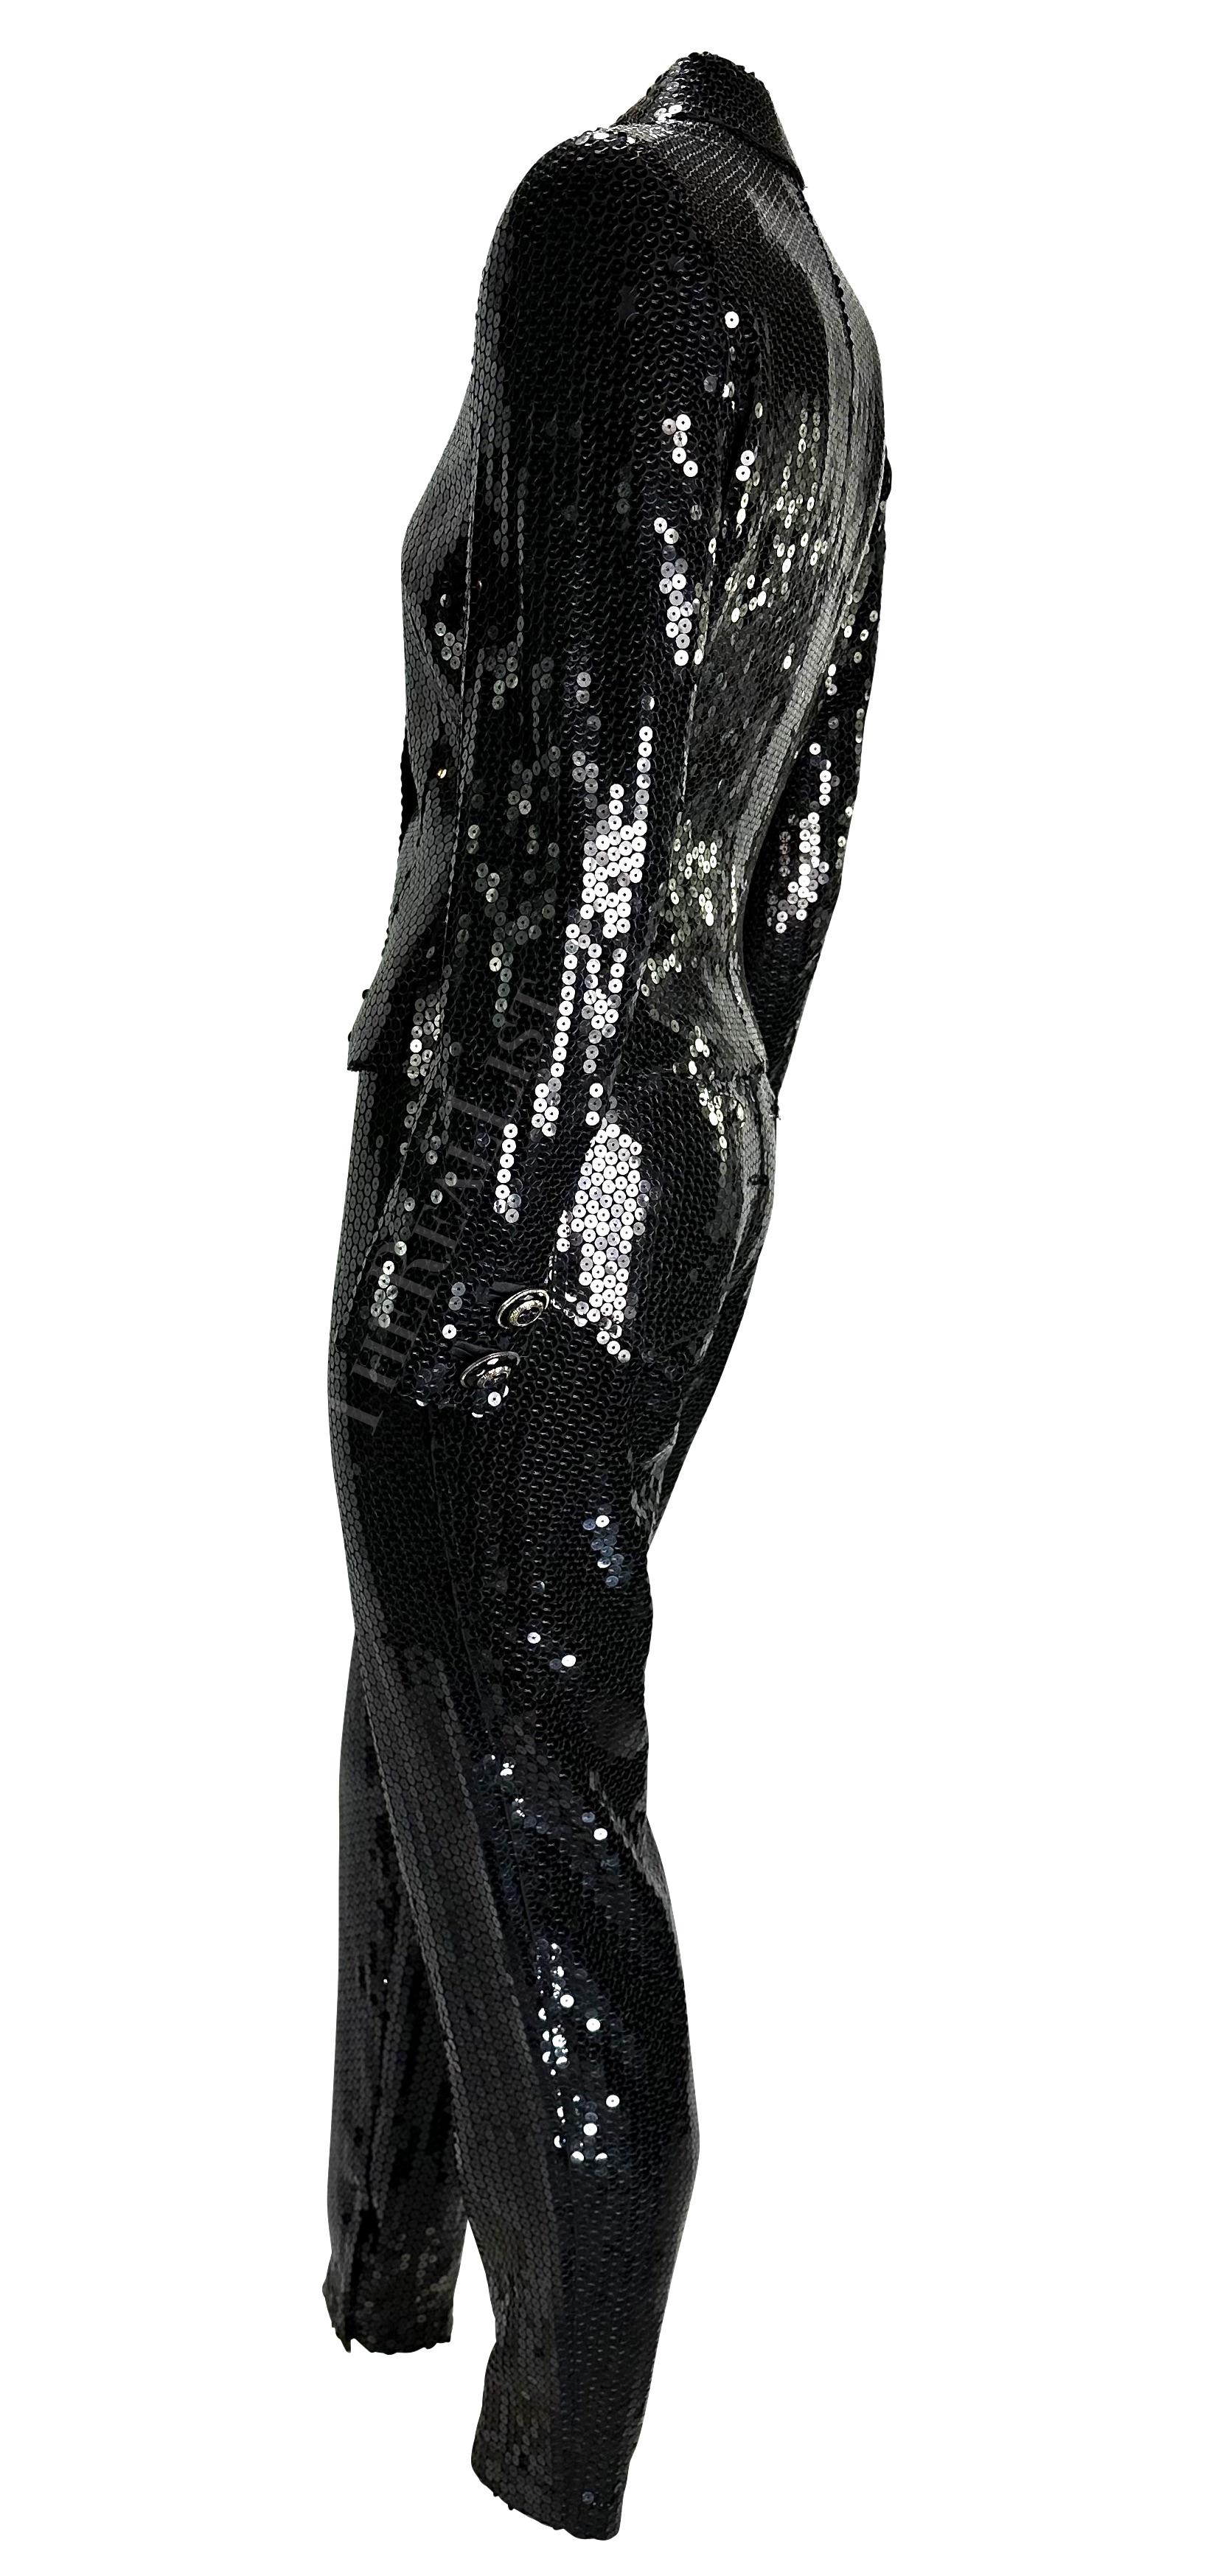 F/W 1995 Gianni Versace Couture Black Sequin Medusa Button Pant Suit In Excellent Condition For Sale In West Hollywood, CA